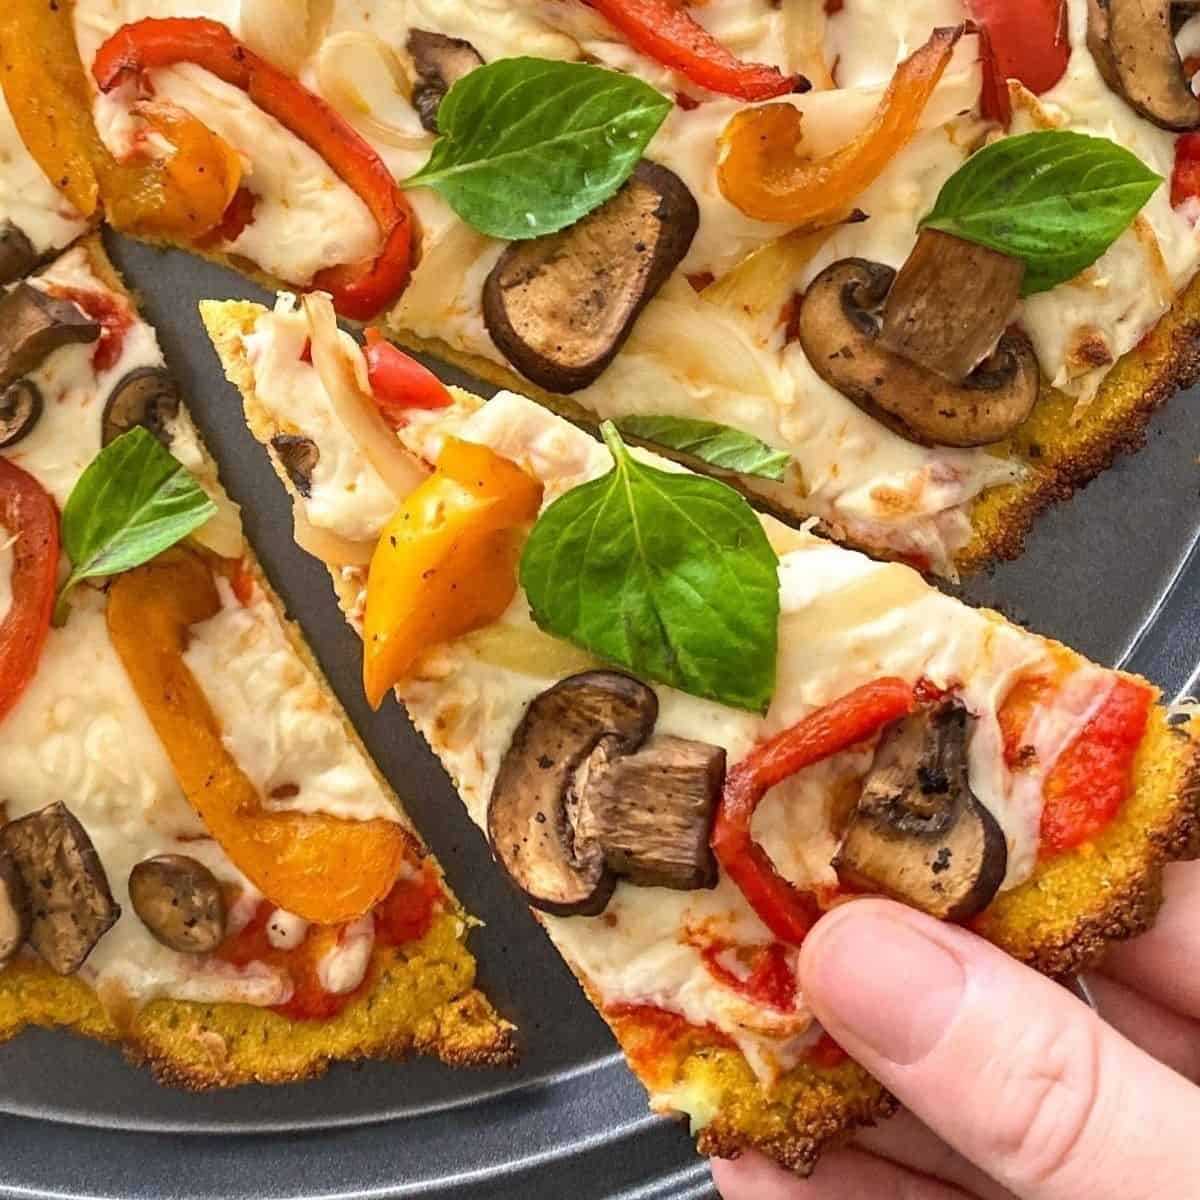 Hand grabbing slice of pizza from pizza tray.